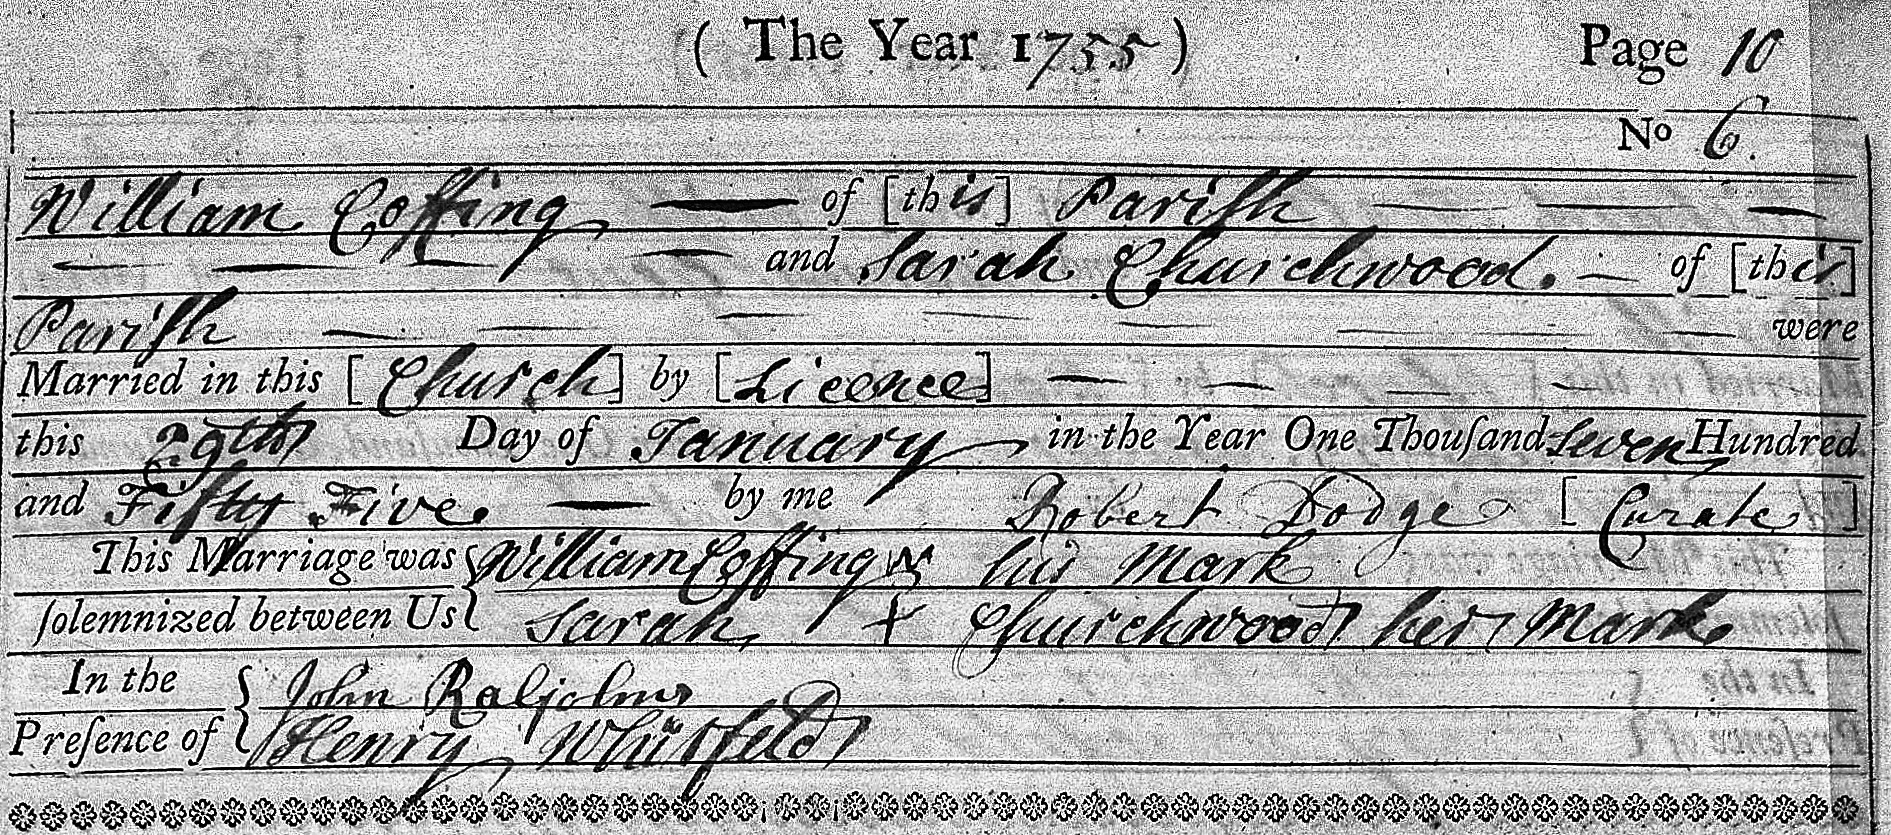 Example Post 1754 Marriage Record